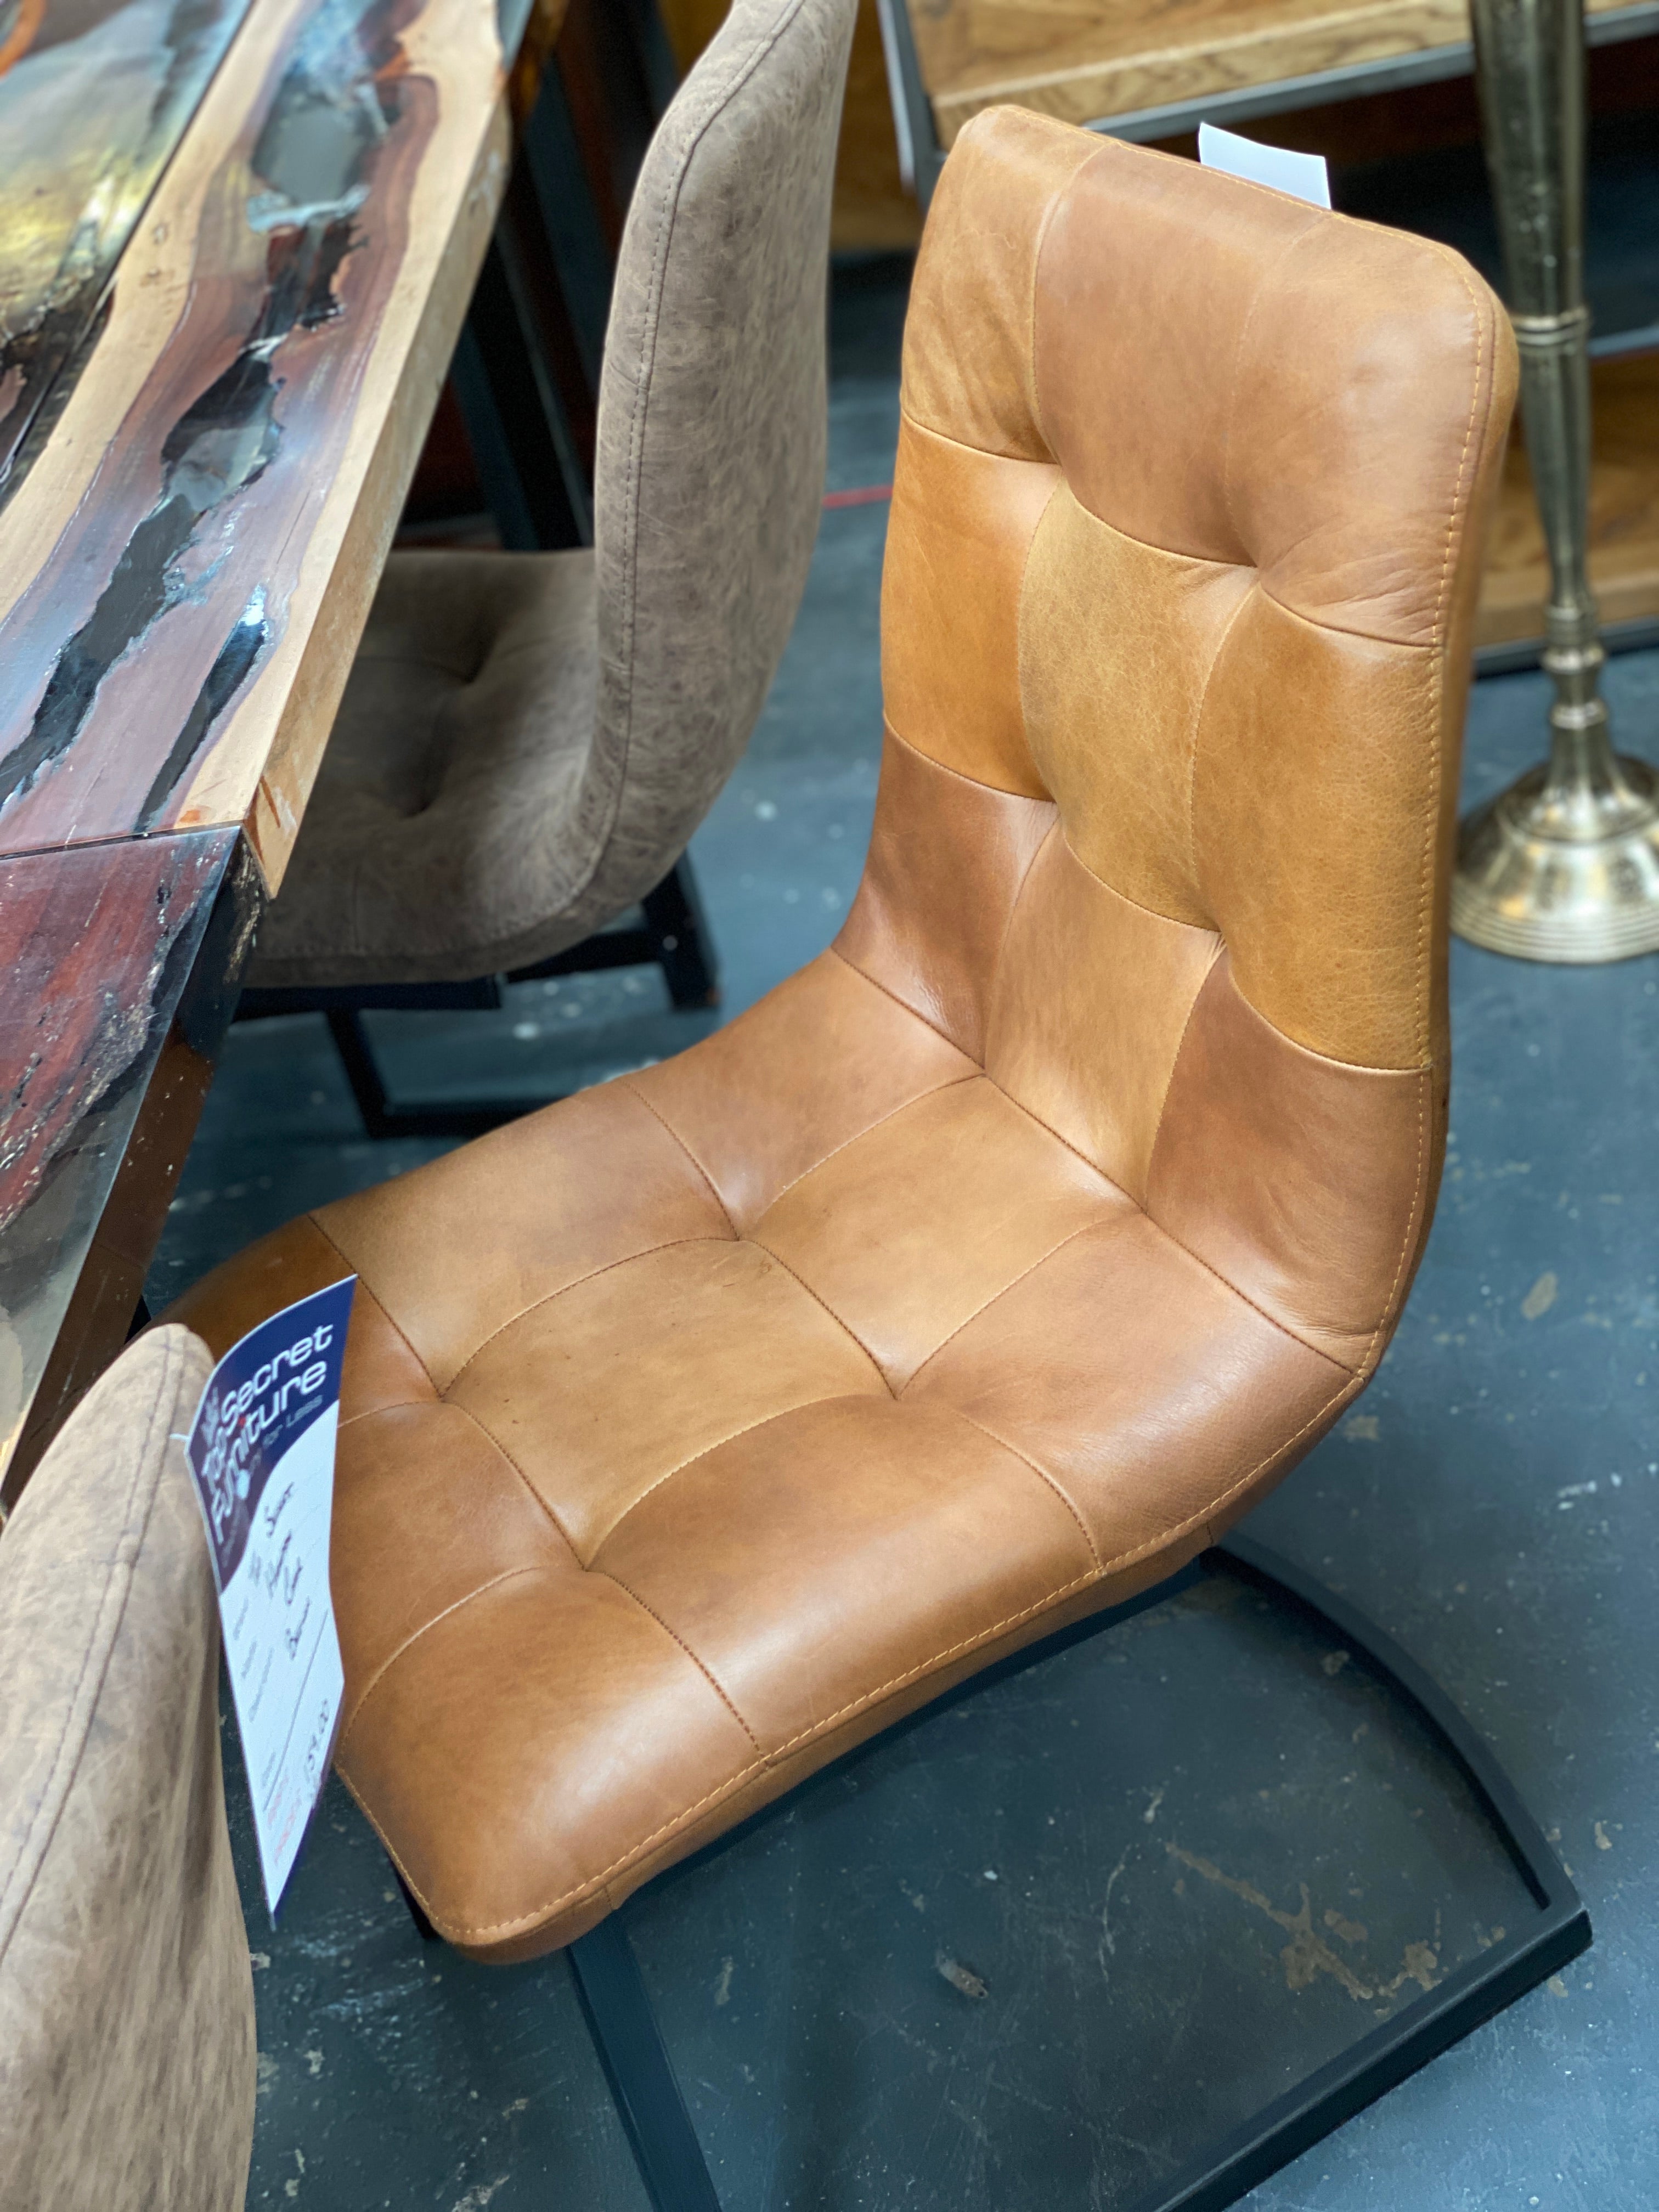 Hampton tan leather dining chair from Top Secret Furniture, Cheshire